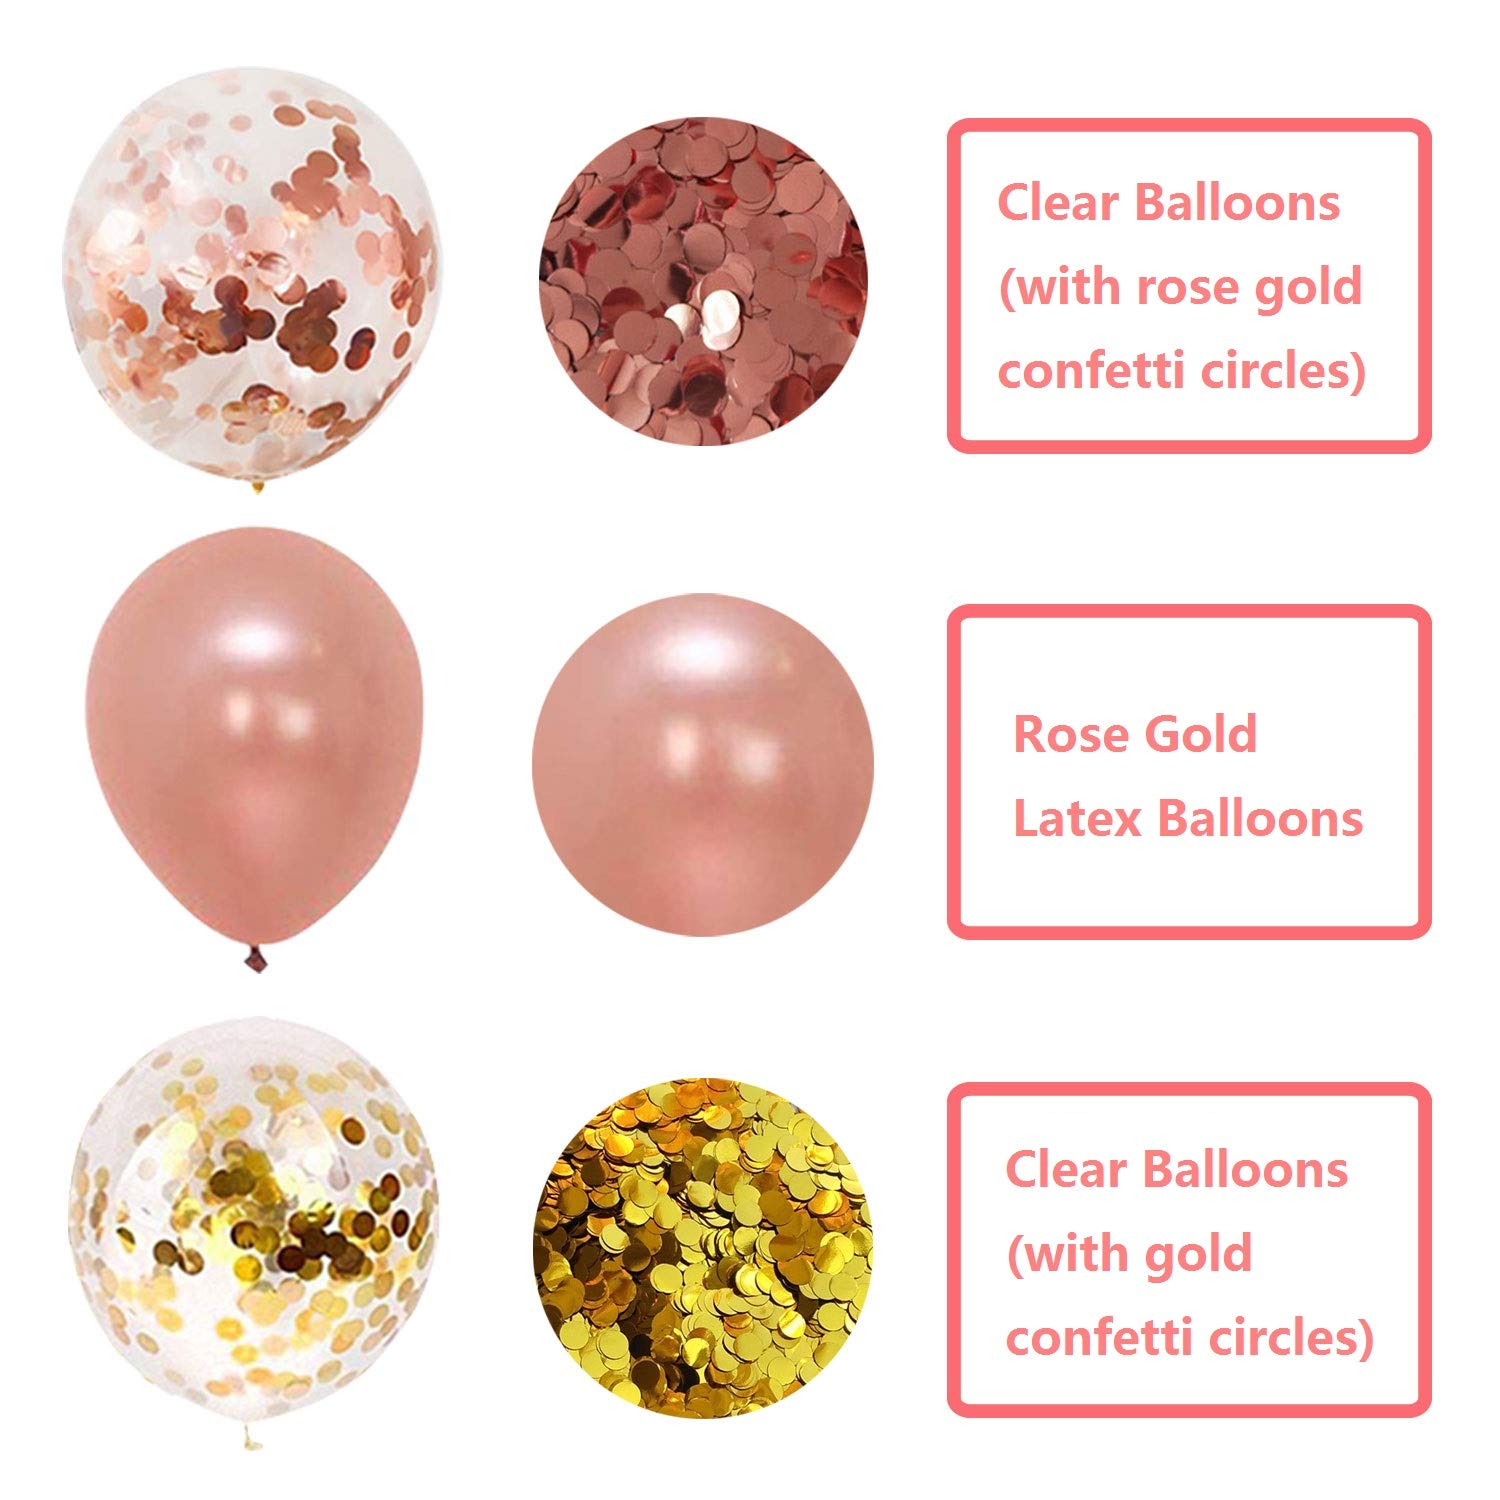 Rose Gold Balloons Party Decorations Supplies Set 35 Pack Include 30 Balloons, 2 Foil Fringe Curtains, 1 Rose Gold Sequin Table Runner, 2 Foil Ribbon for Birthday Party, Wedding,Xmas New Year Festival